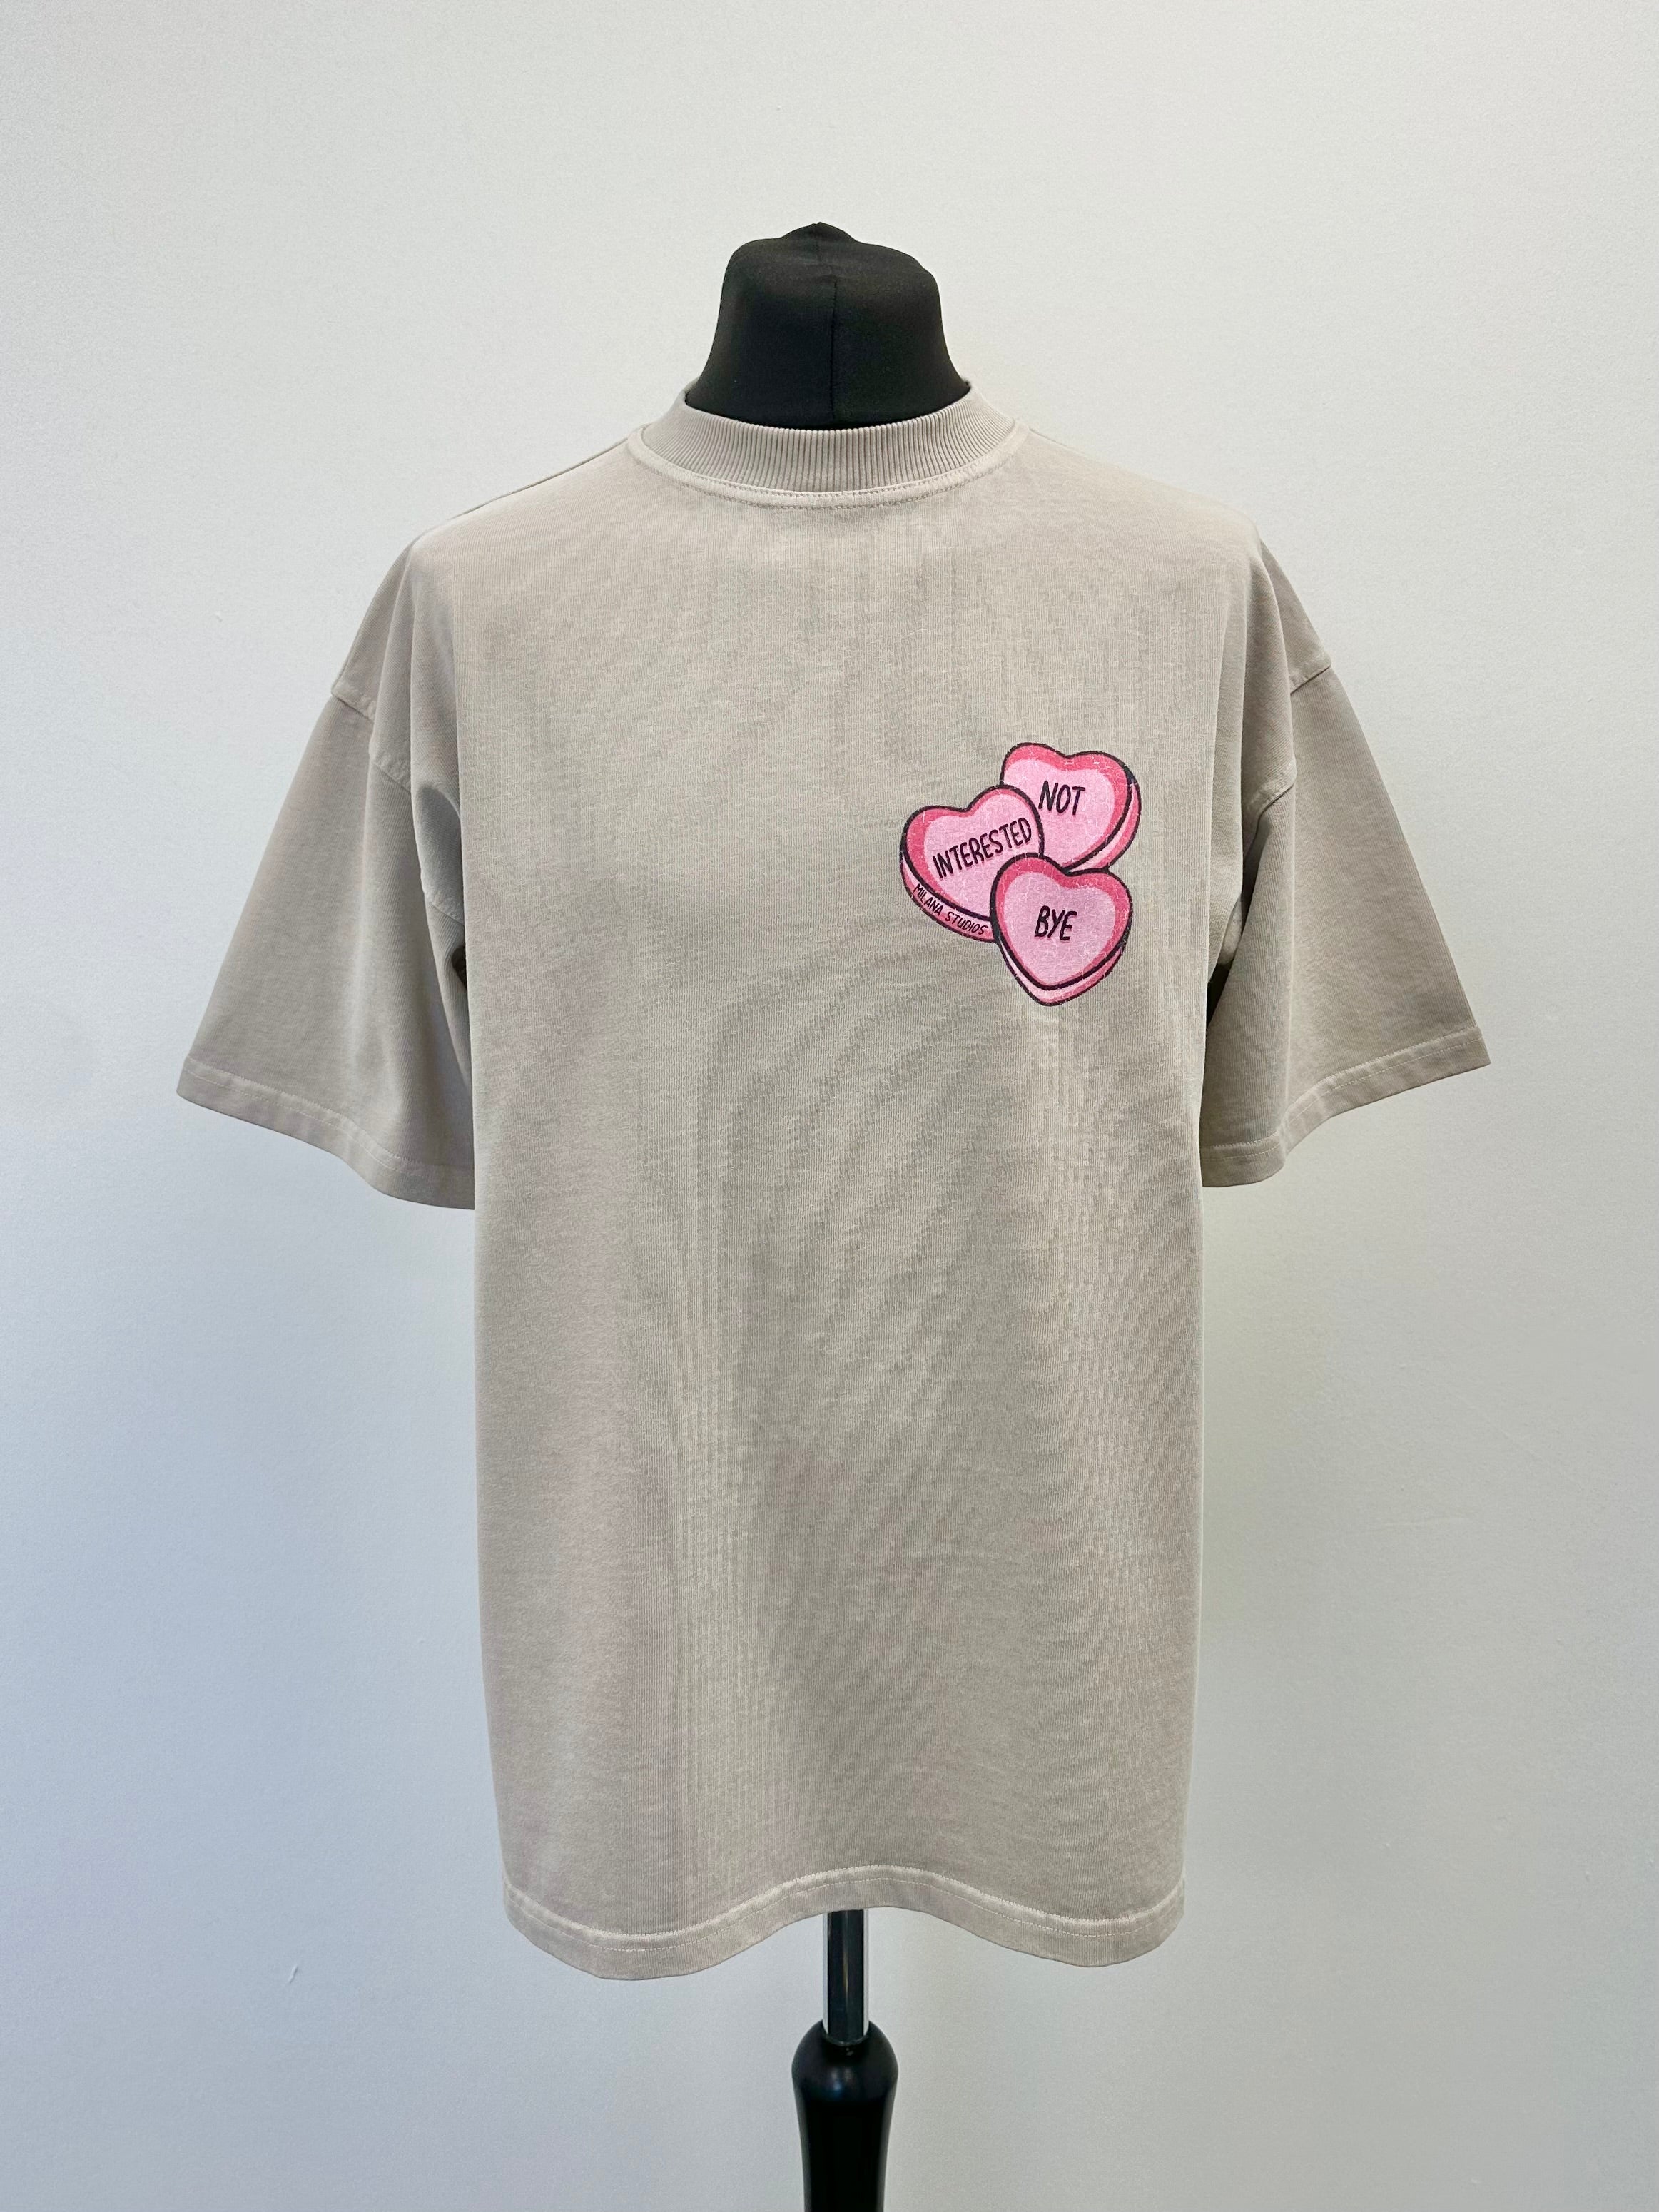 Washed Taupe Heavyweight Hearts T-shirt.